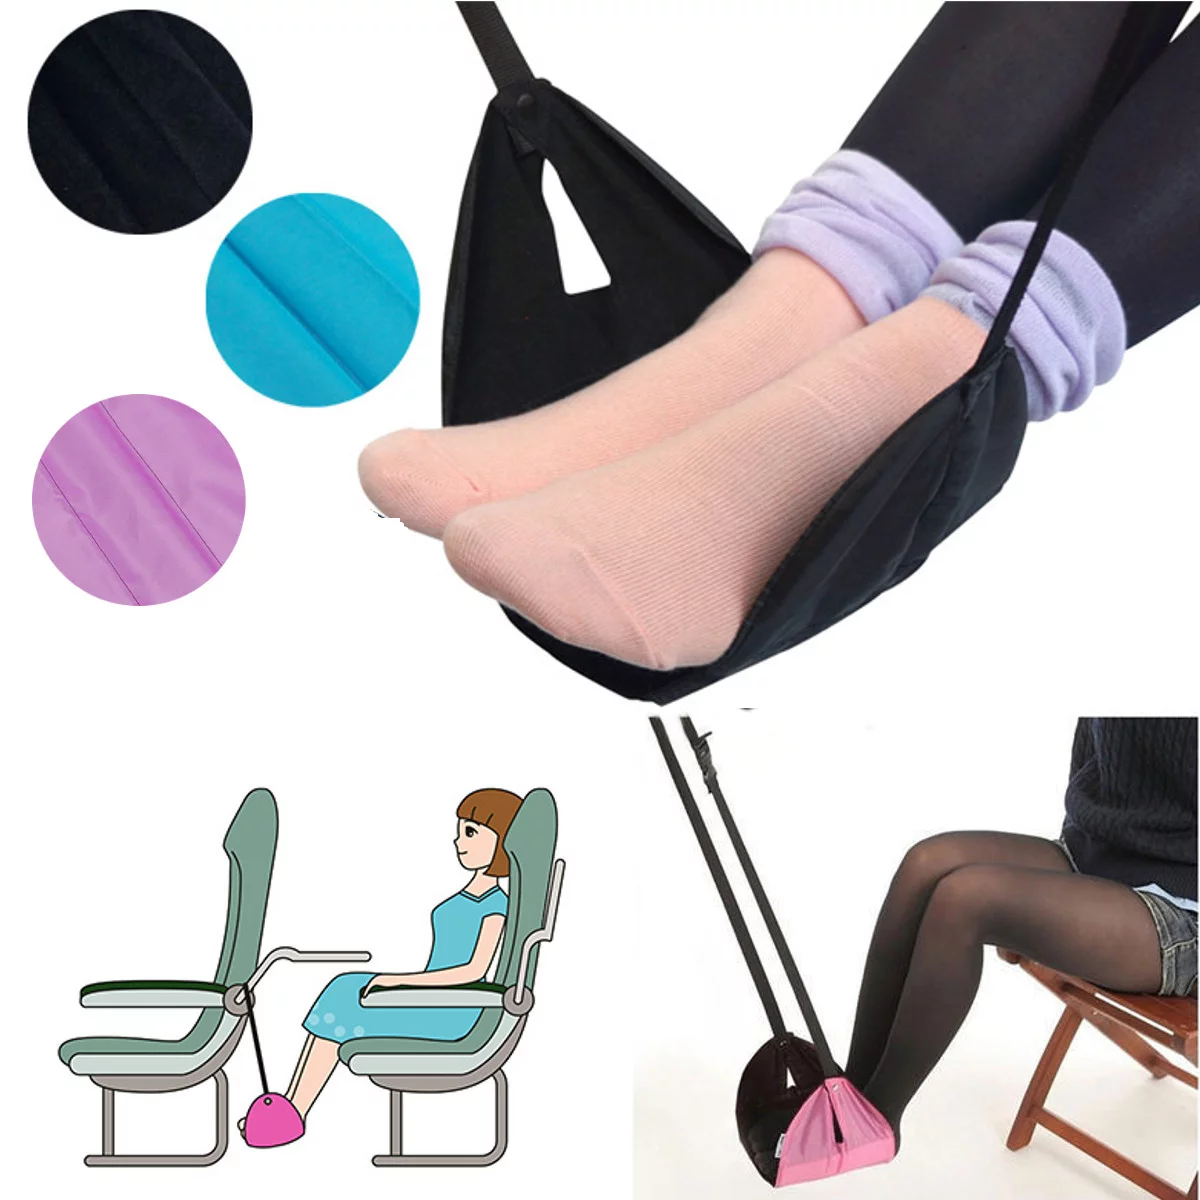 Sleepy Ride - Airplane Footrest Made with Premium Memory Foam - Airplane  Travel Accessories - Tested and Proven to Prevent Swelling and Soreness 